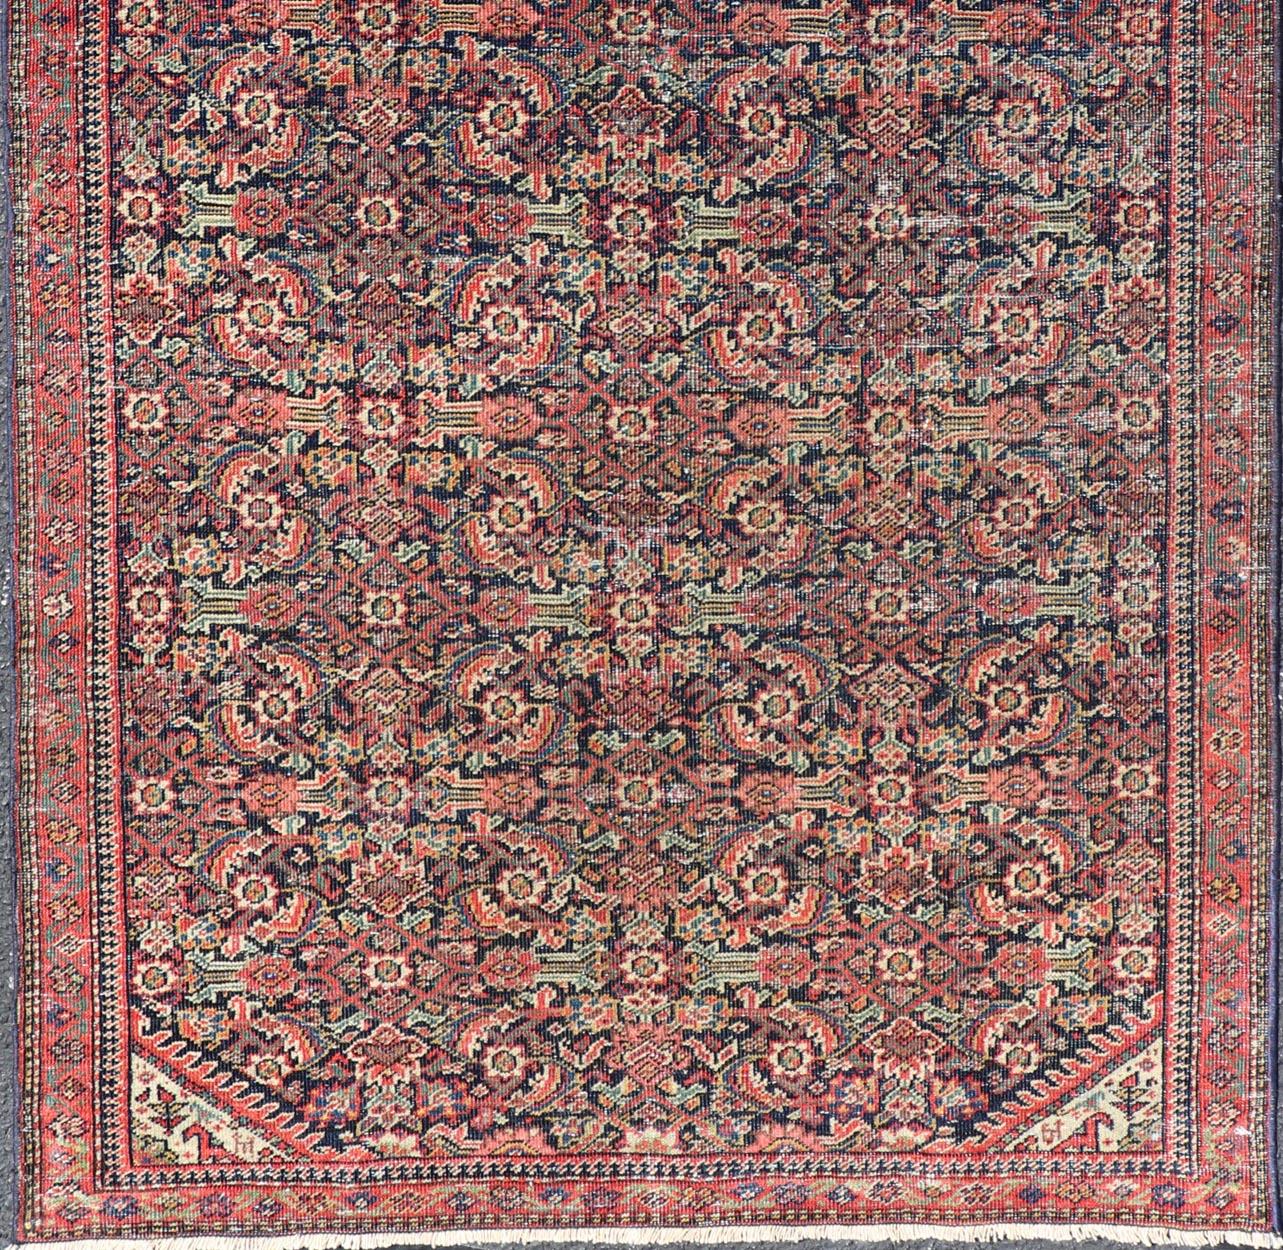 Antique Faraghan fine Persian rug in Navy Color Background And Jewel Tones. Rug / R20-1003 / Type / Iran / Faraghan / Circa early 20th century.
Measures: 2'10 x 5'6. 
This exquisite antique Faraghan fine Persian rug displays a rich palette of